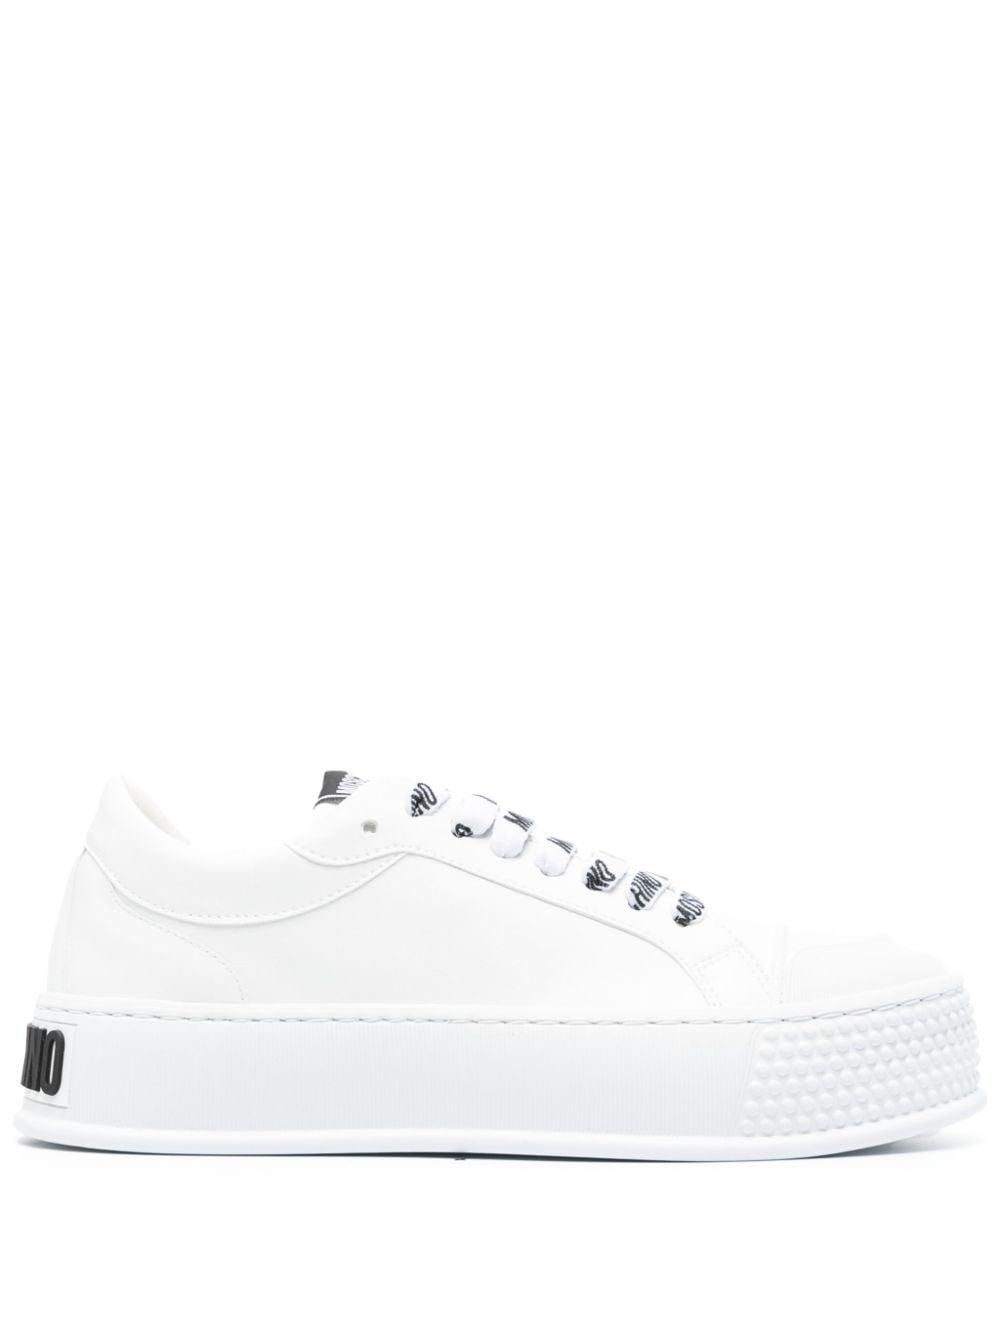 Moschino Embossed-logo Faux-leather Sneakers in White | Lyst